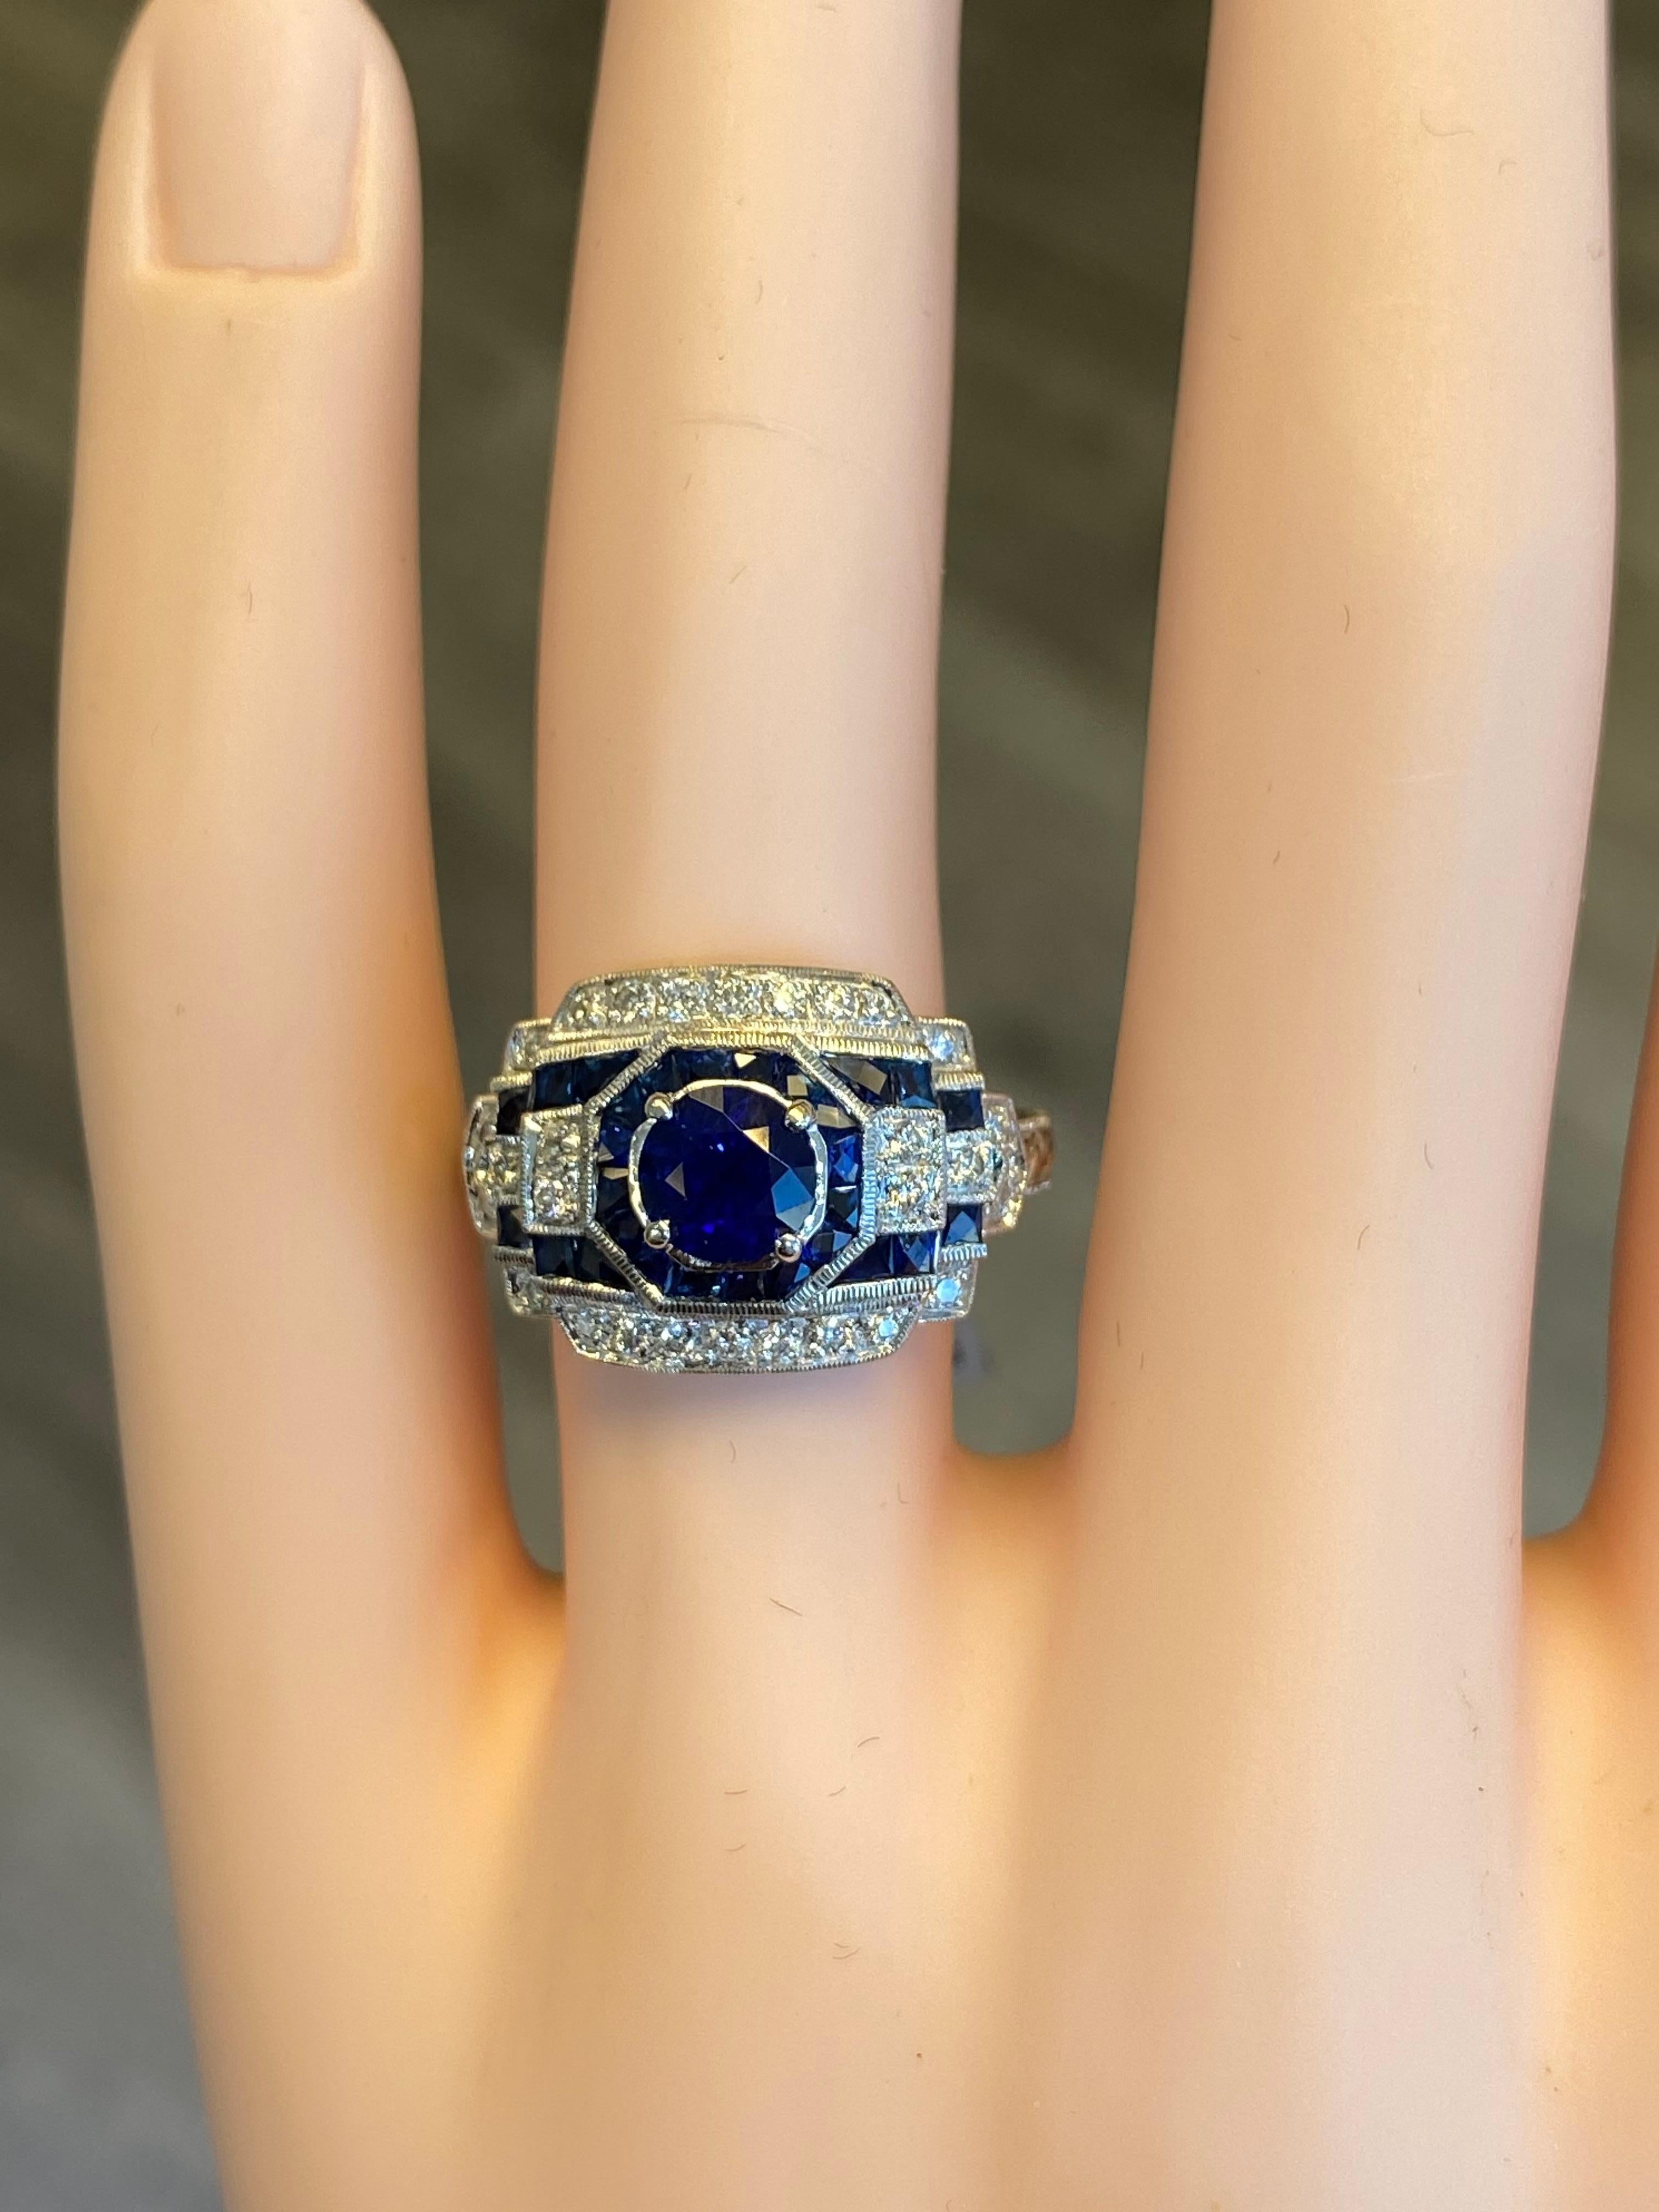 Art Deco style ring with round and french cut sapphires.
Center 1.20ct round sapphire, surrounded by 1.20ct of french cut sapphires and 0.26ct of round cut diamonds. 18k white gold with milgrain and filigree work.
2.66ct total gemstone